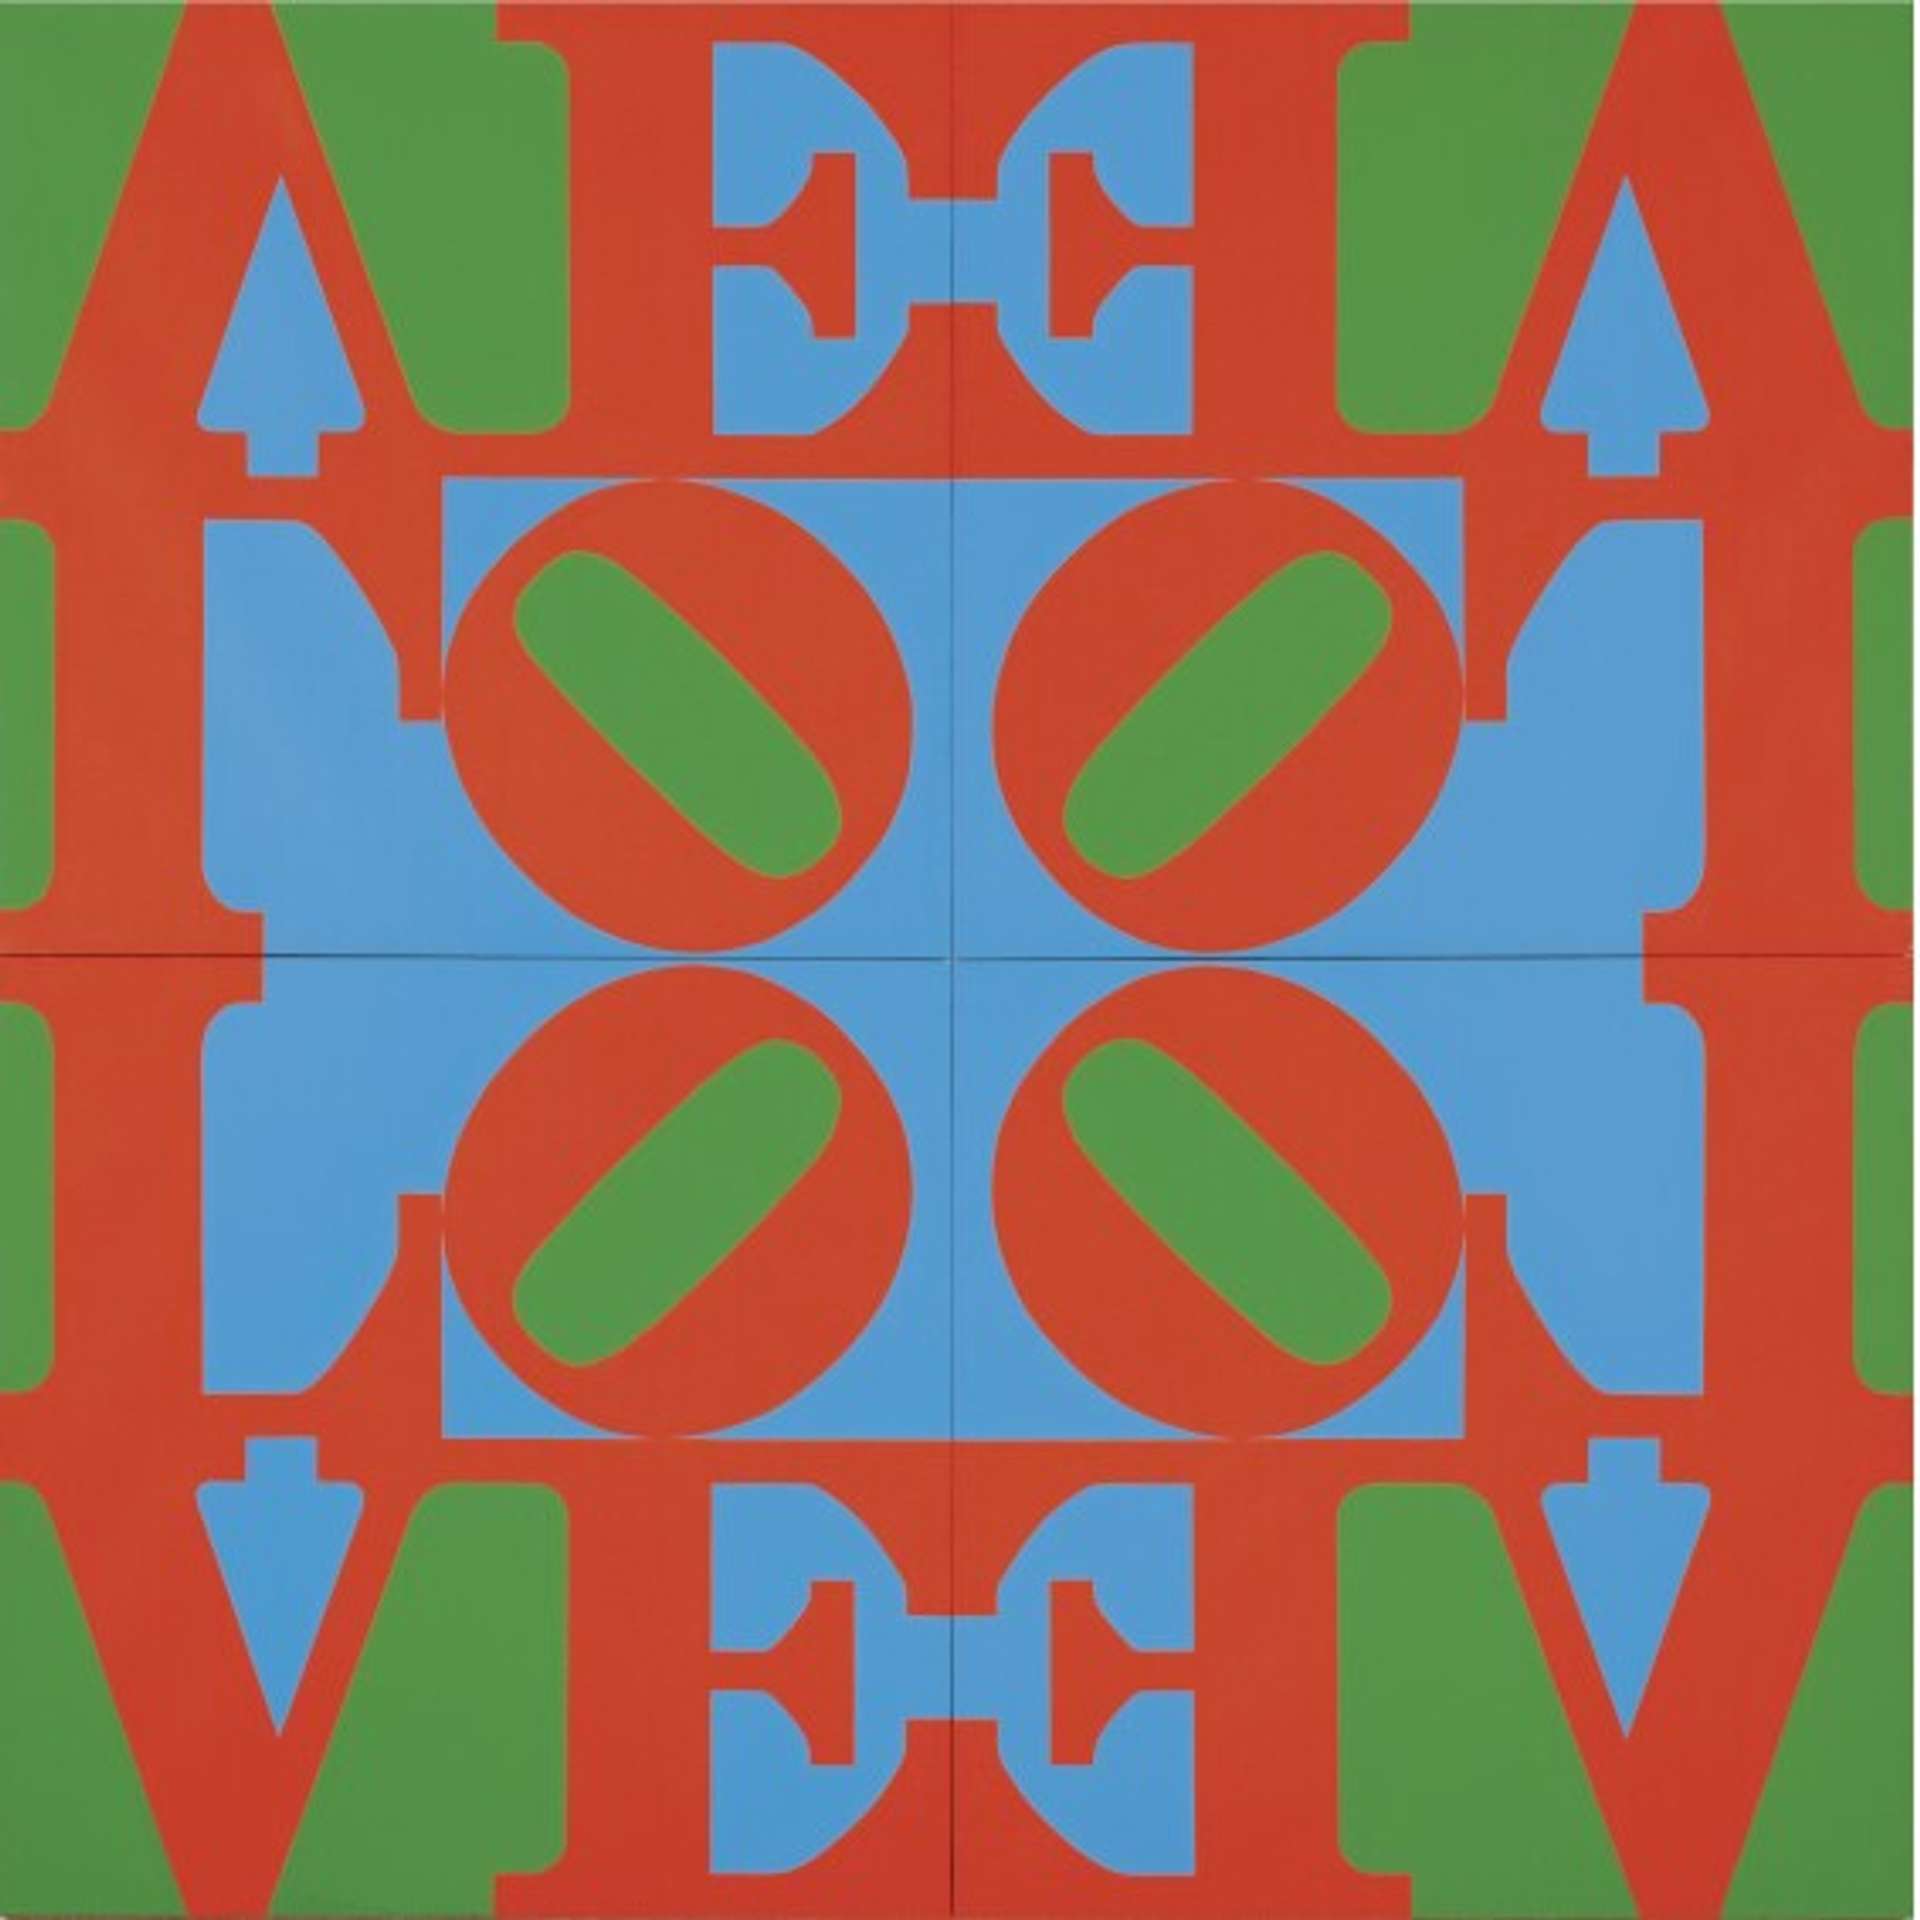 Love Wall (Red Blue Green) by Robert Indiana